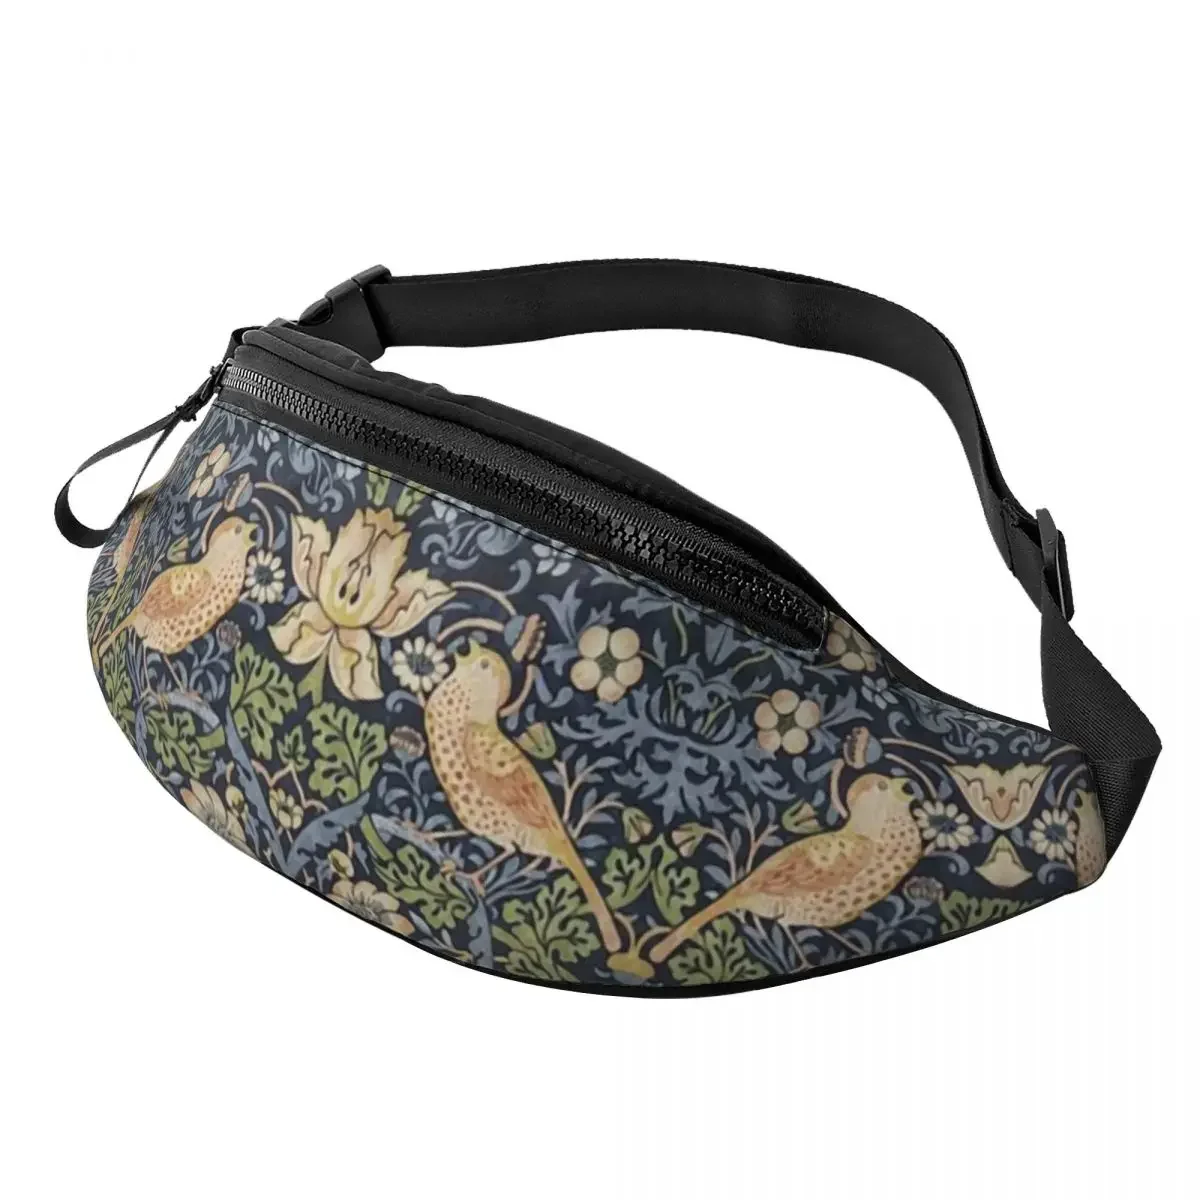 

William Morris Strawberry Thief Pattern Fanny Pack Women Men Vintage Textile Crossbody Waist Bag for Traveling Phone Money Pouch